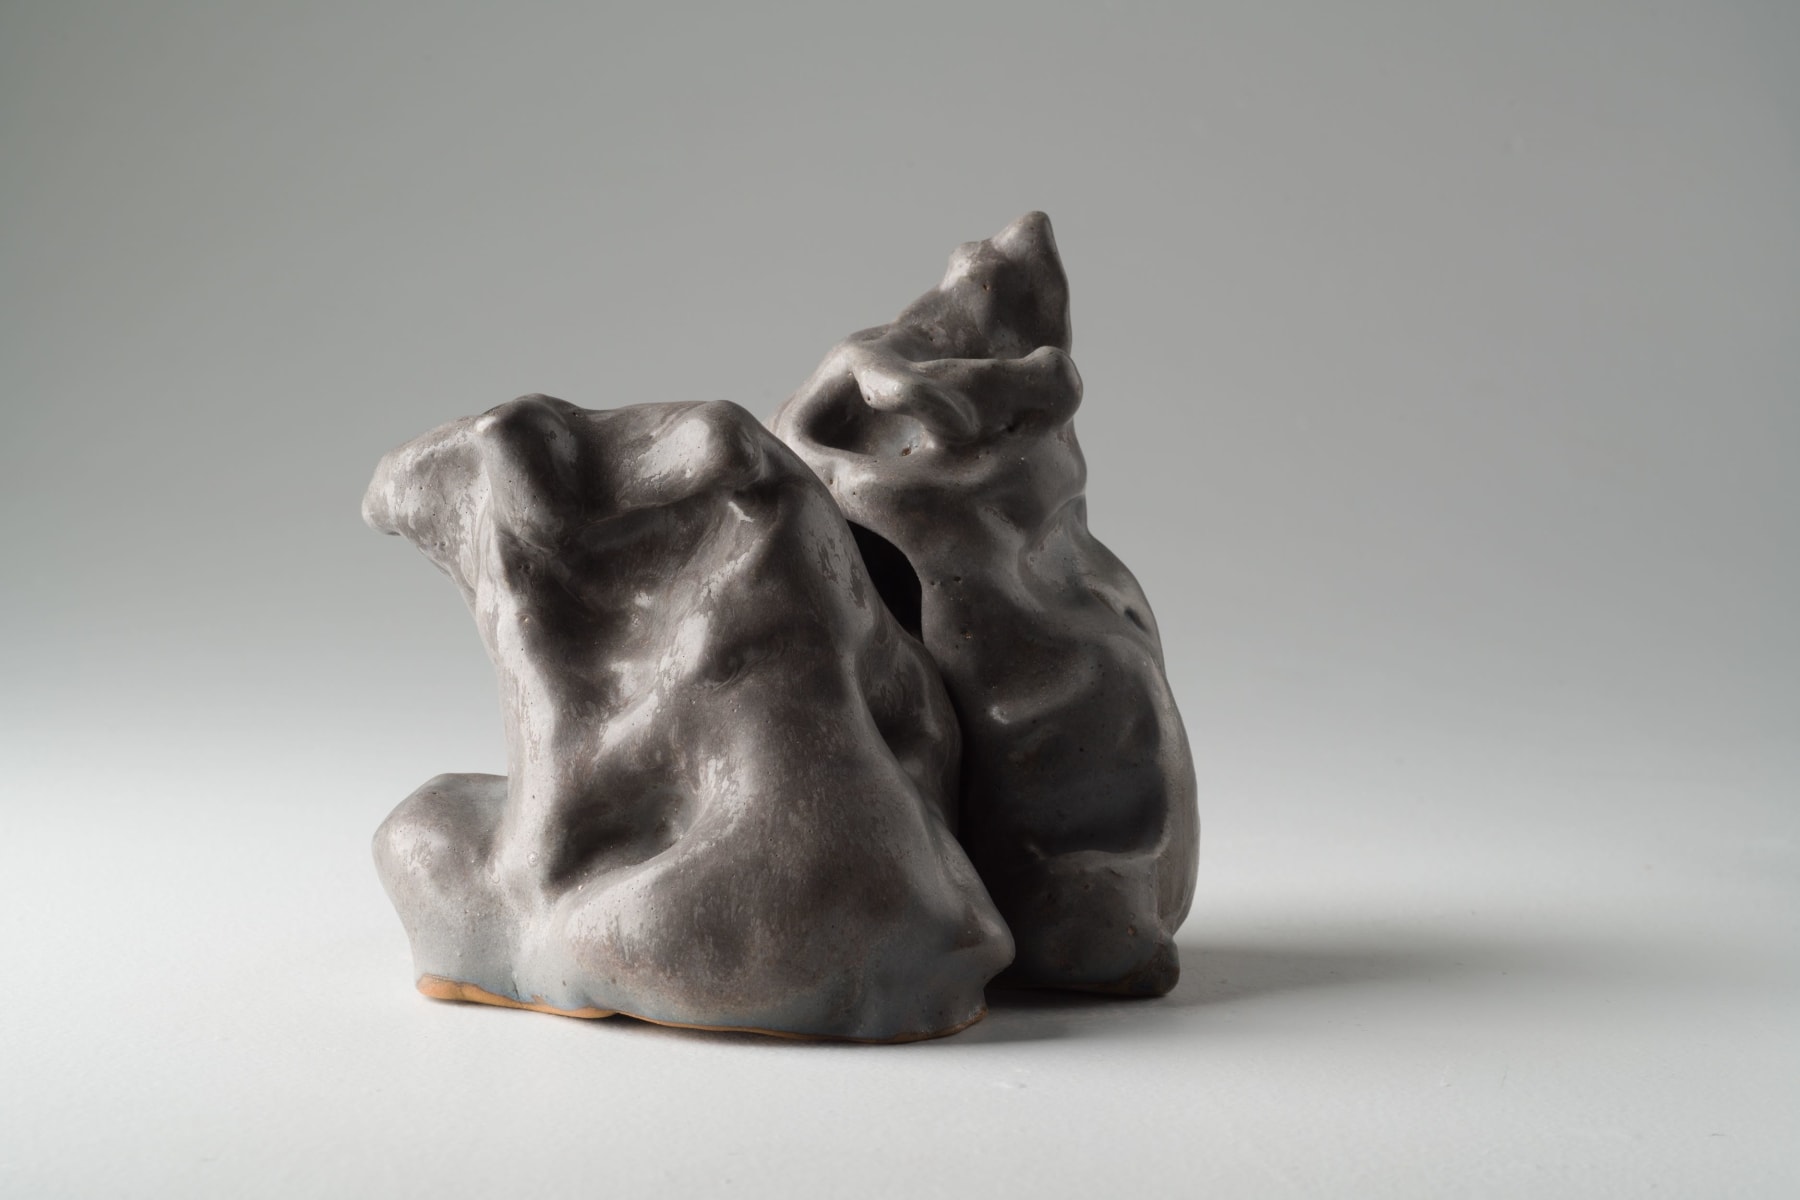 V3 Dido Sculptural From Glaze on stoneware 19 x 22 x 15 cm AUD $1400